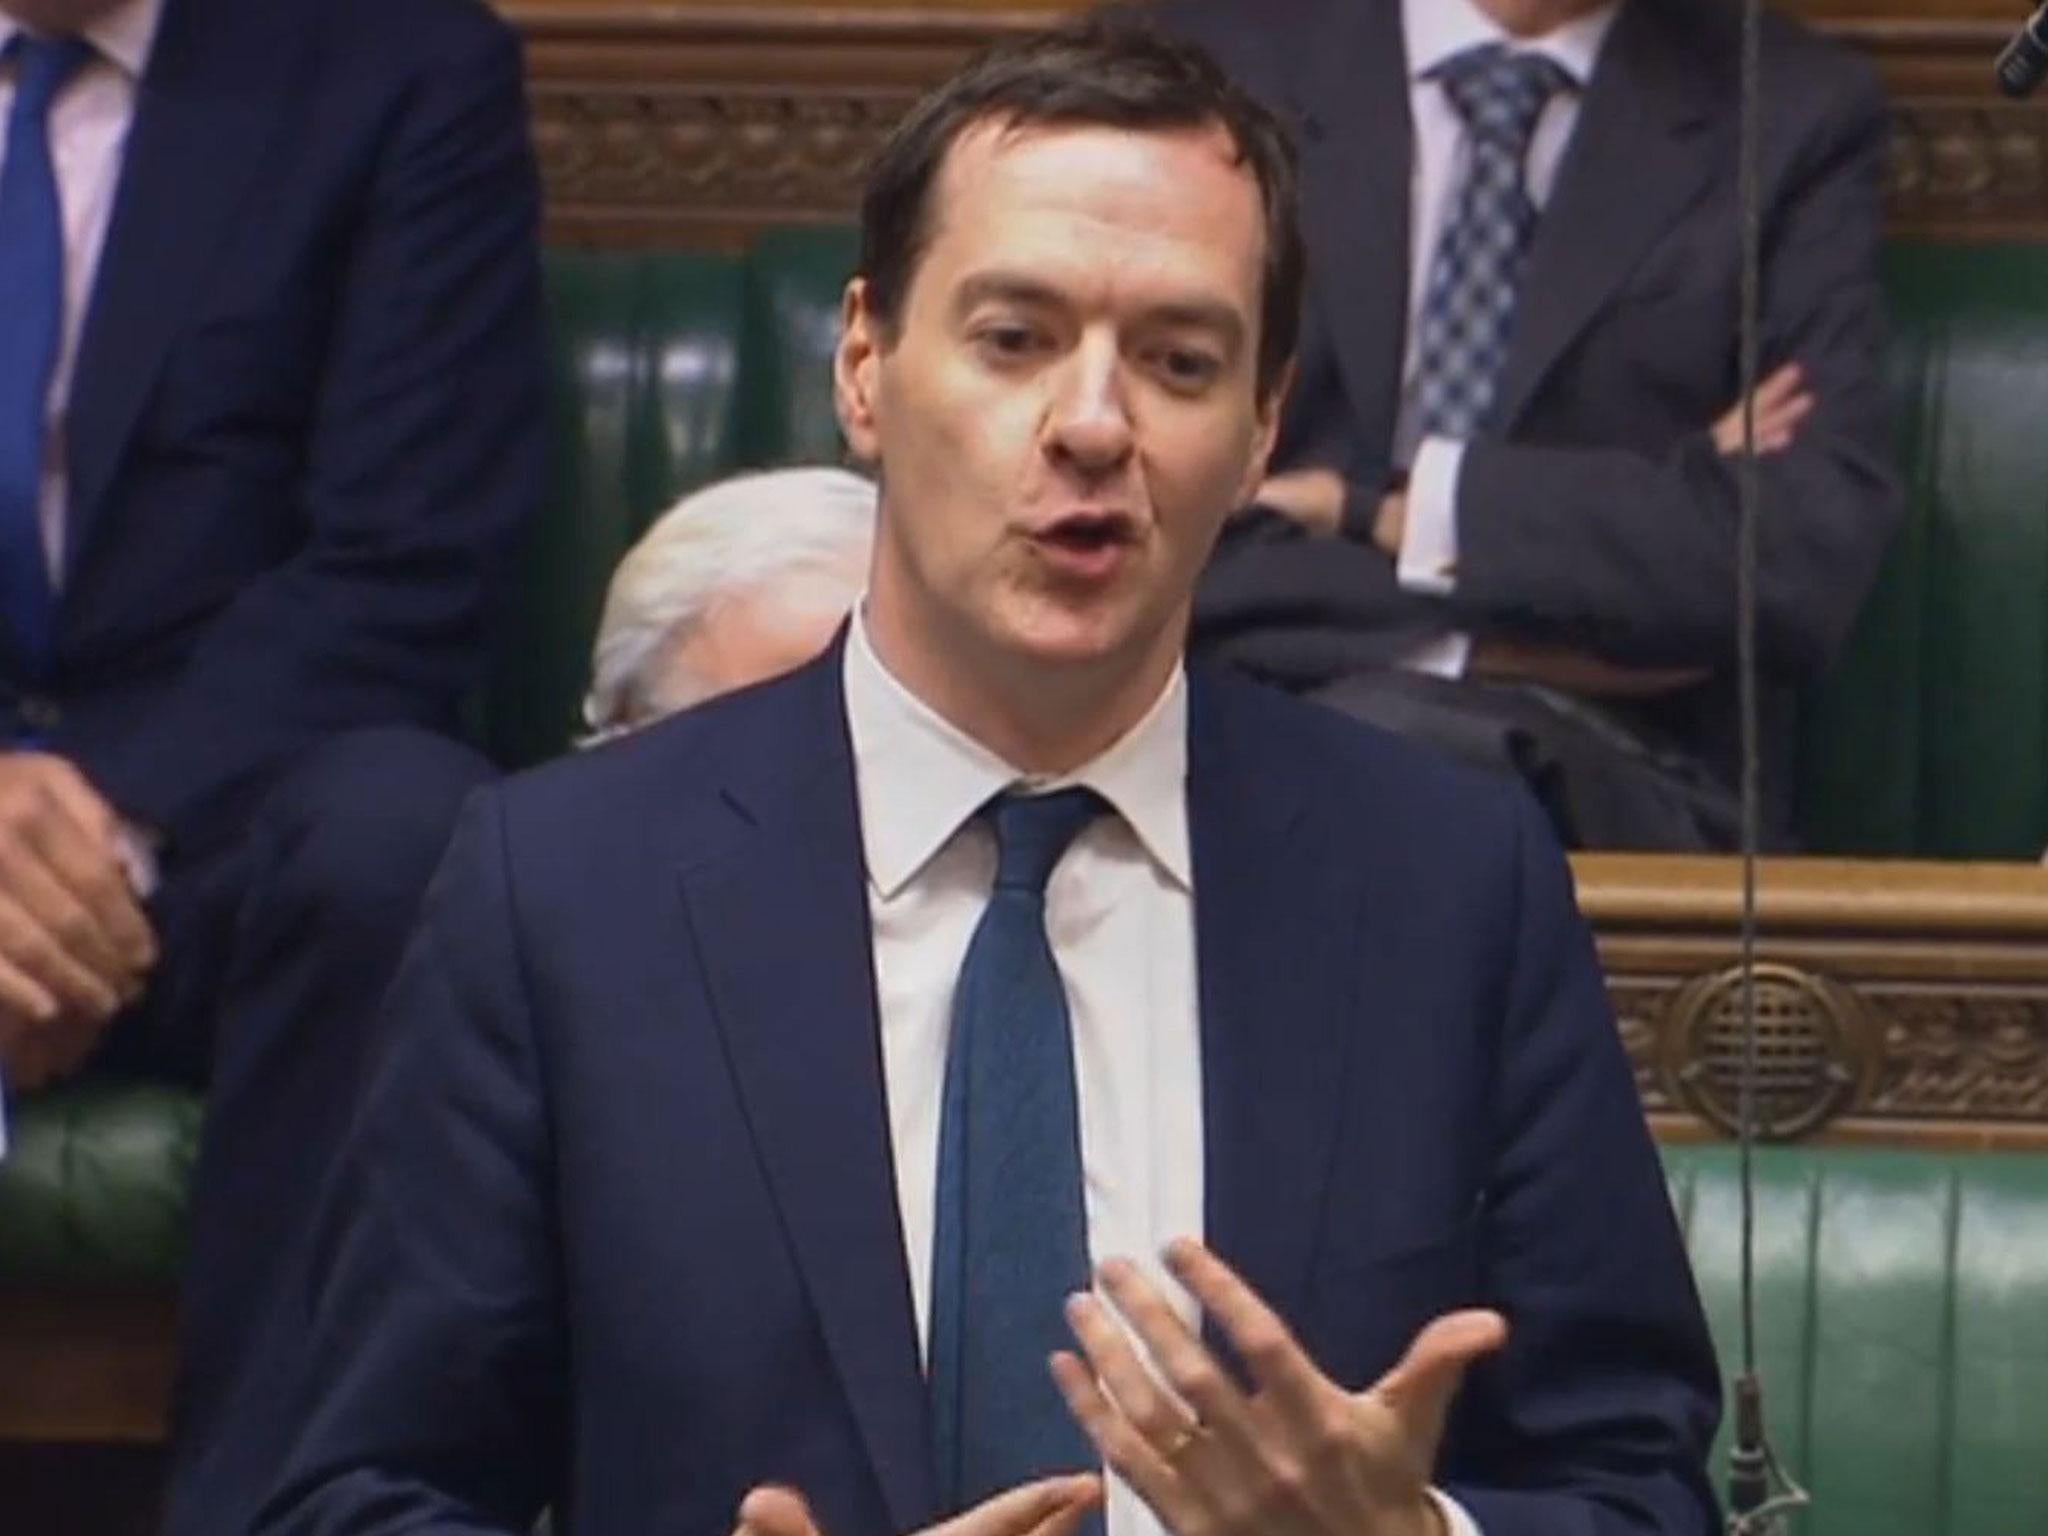 The outgoing Tatton MP and new editor of the London Evening Standard, George Osborne